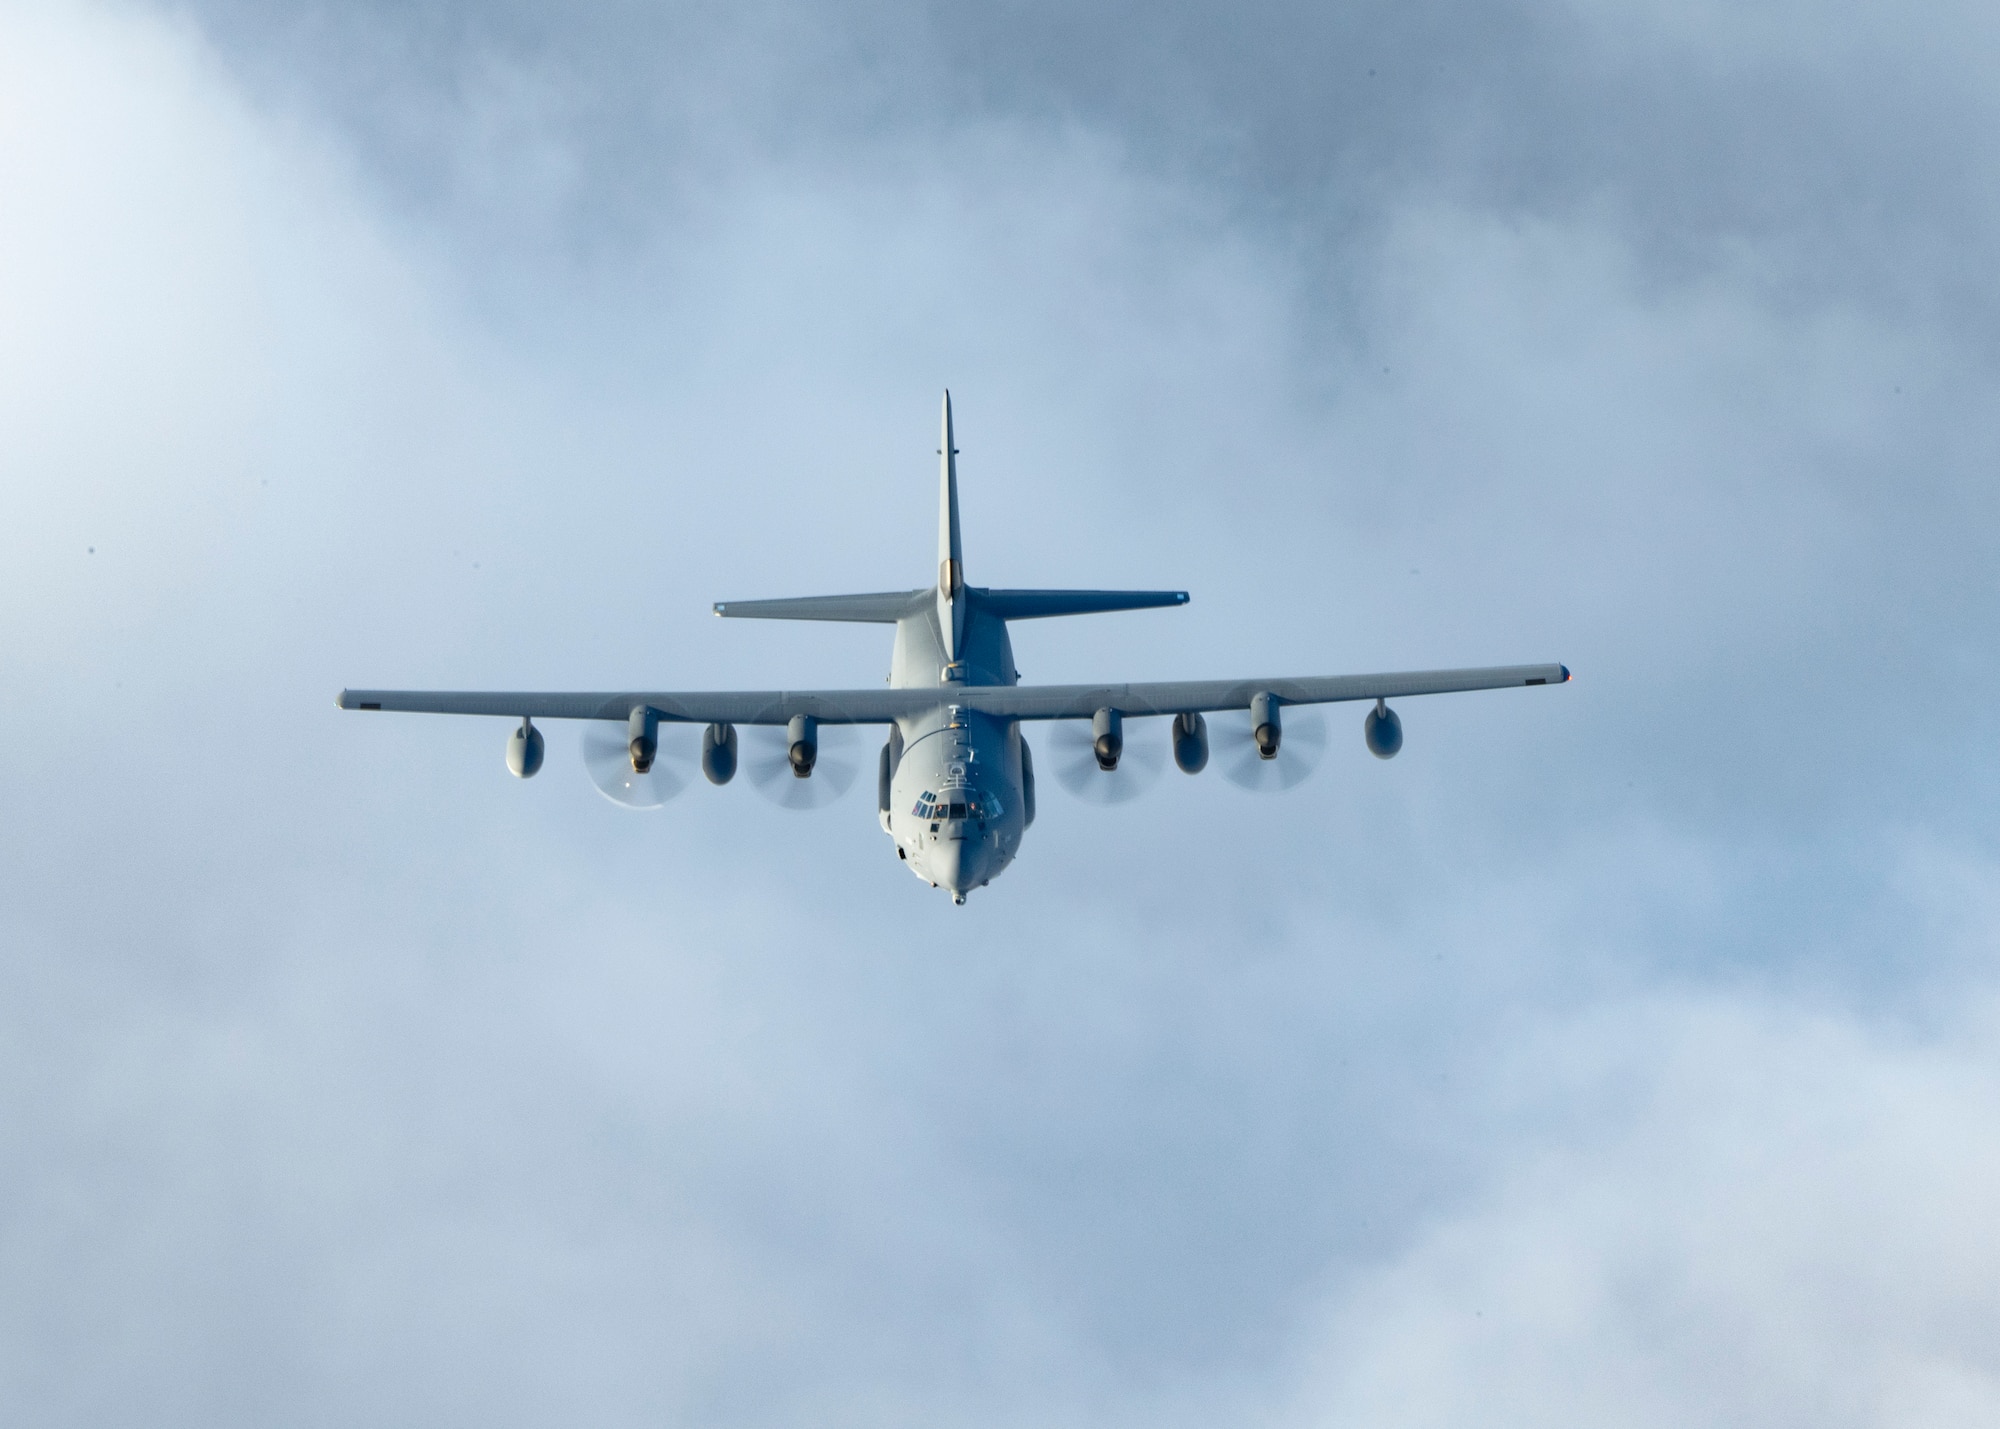 An MC-130J Commando II, assigned to the 352d Special Operations Wing, flies over Sweden on November 13, 2020. U.S. and Swedish armed forces conduct qualified exercises together to strengthen defense capabilities across land, air, and sea domains to deter any opponent. (U.S. Air Force photo by Master Sgt. Roidan Carlson)